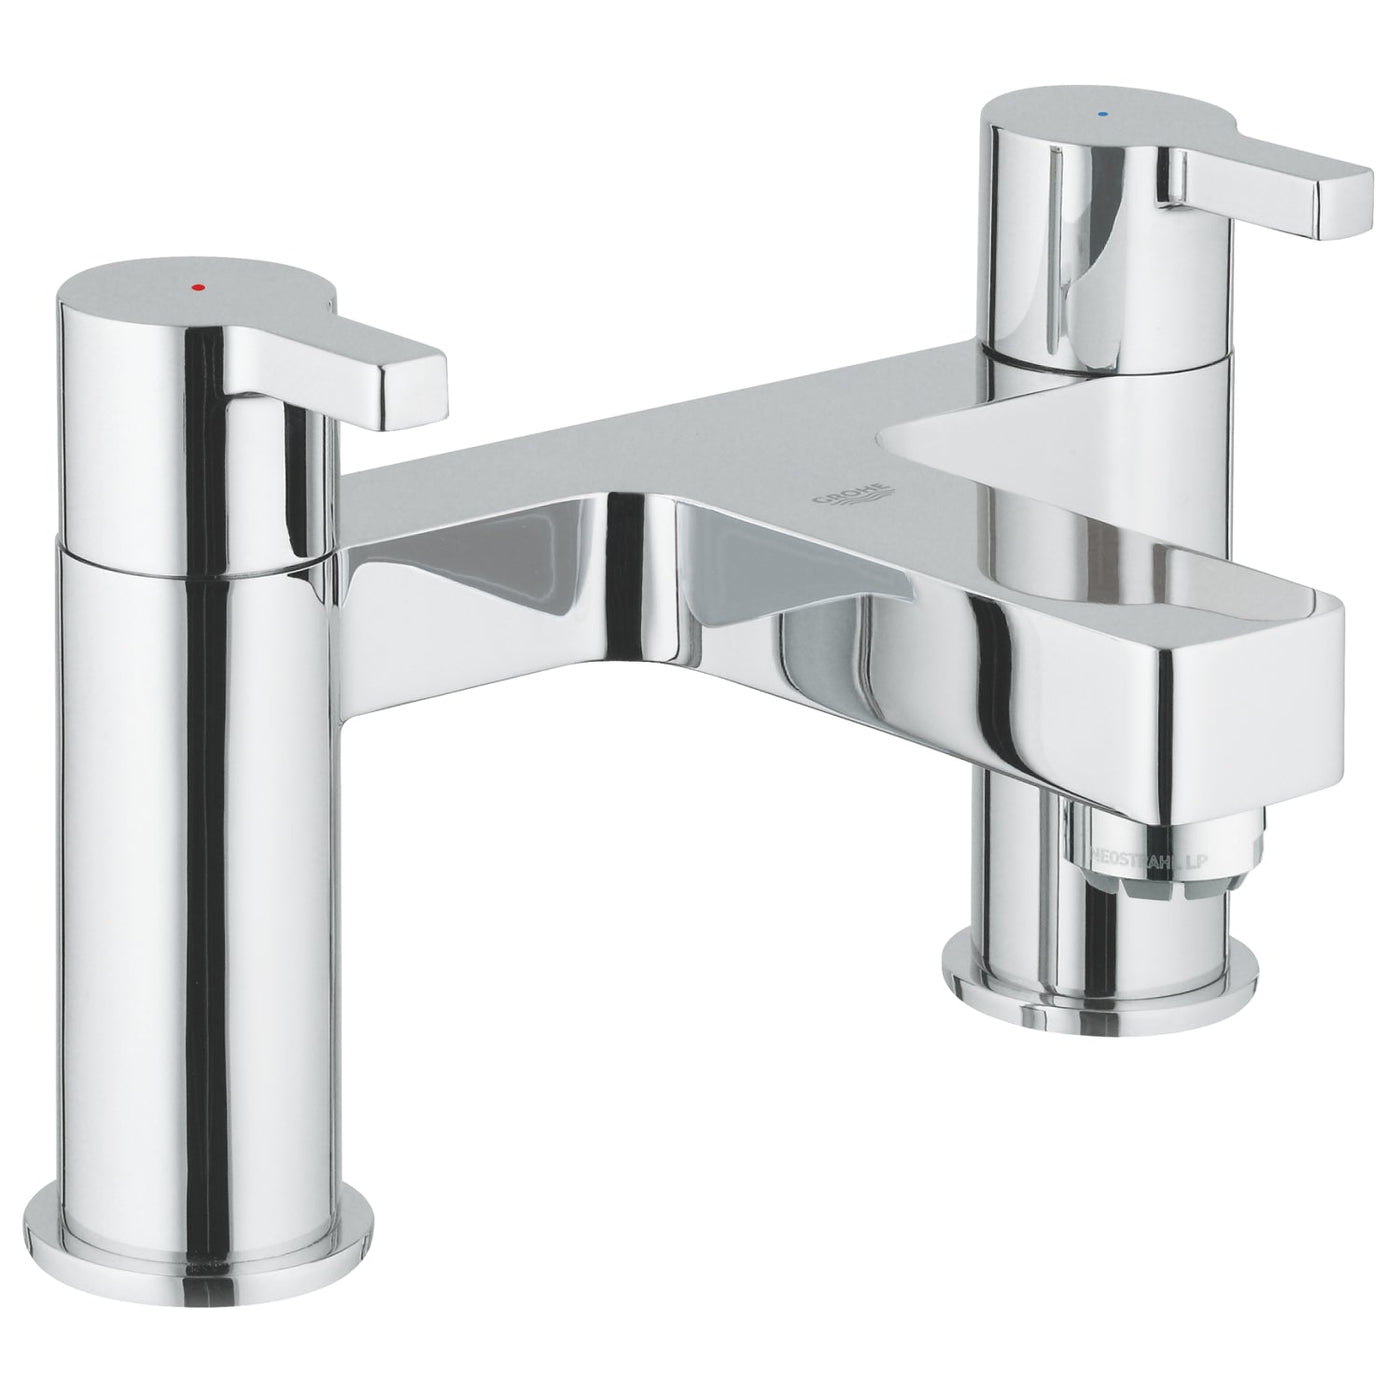 Grohe Deck Mounted Chrome Lineare Two-handled Bath filler 1/2" - Letta London - Deck Mounted Bath Tap